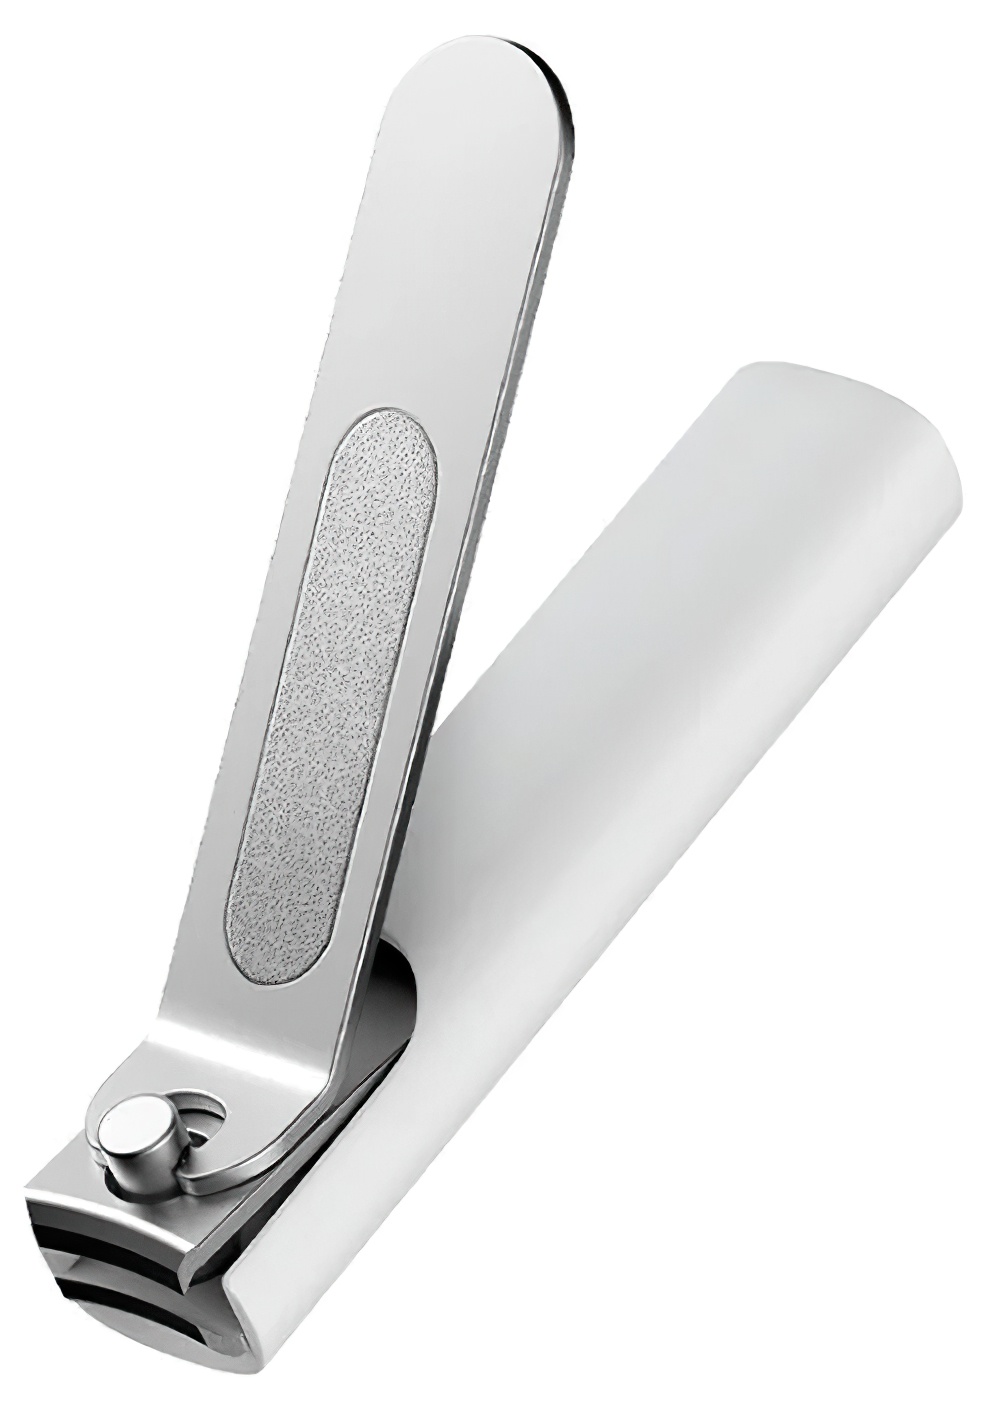 Xiaomi Mijia Stainless Steel Nail Clippers (MJZJD001QW) соковыжималка xiaomi boost ur diet juicer stainless steel bj 36